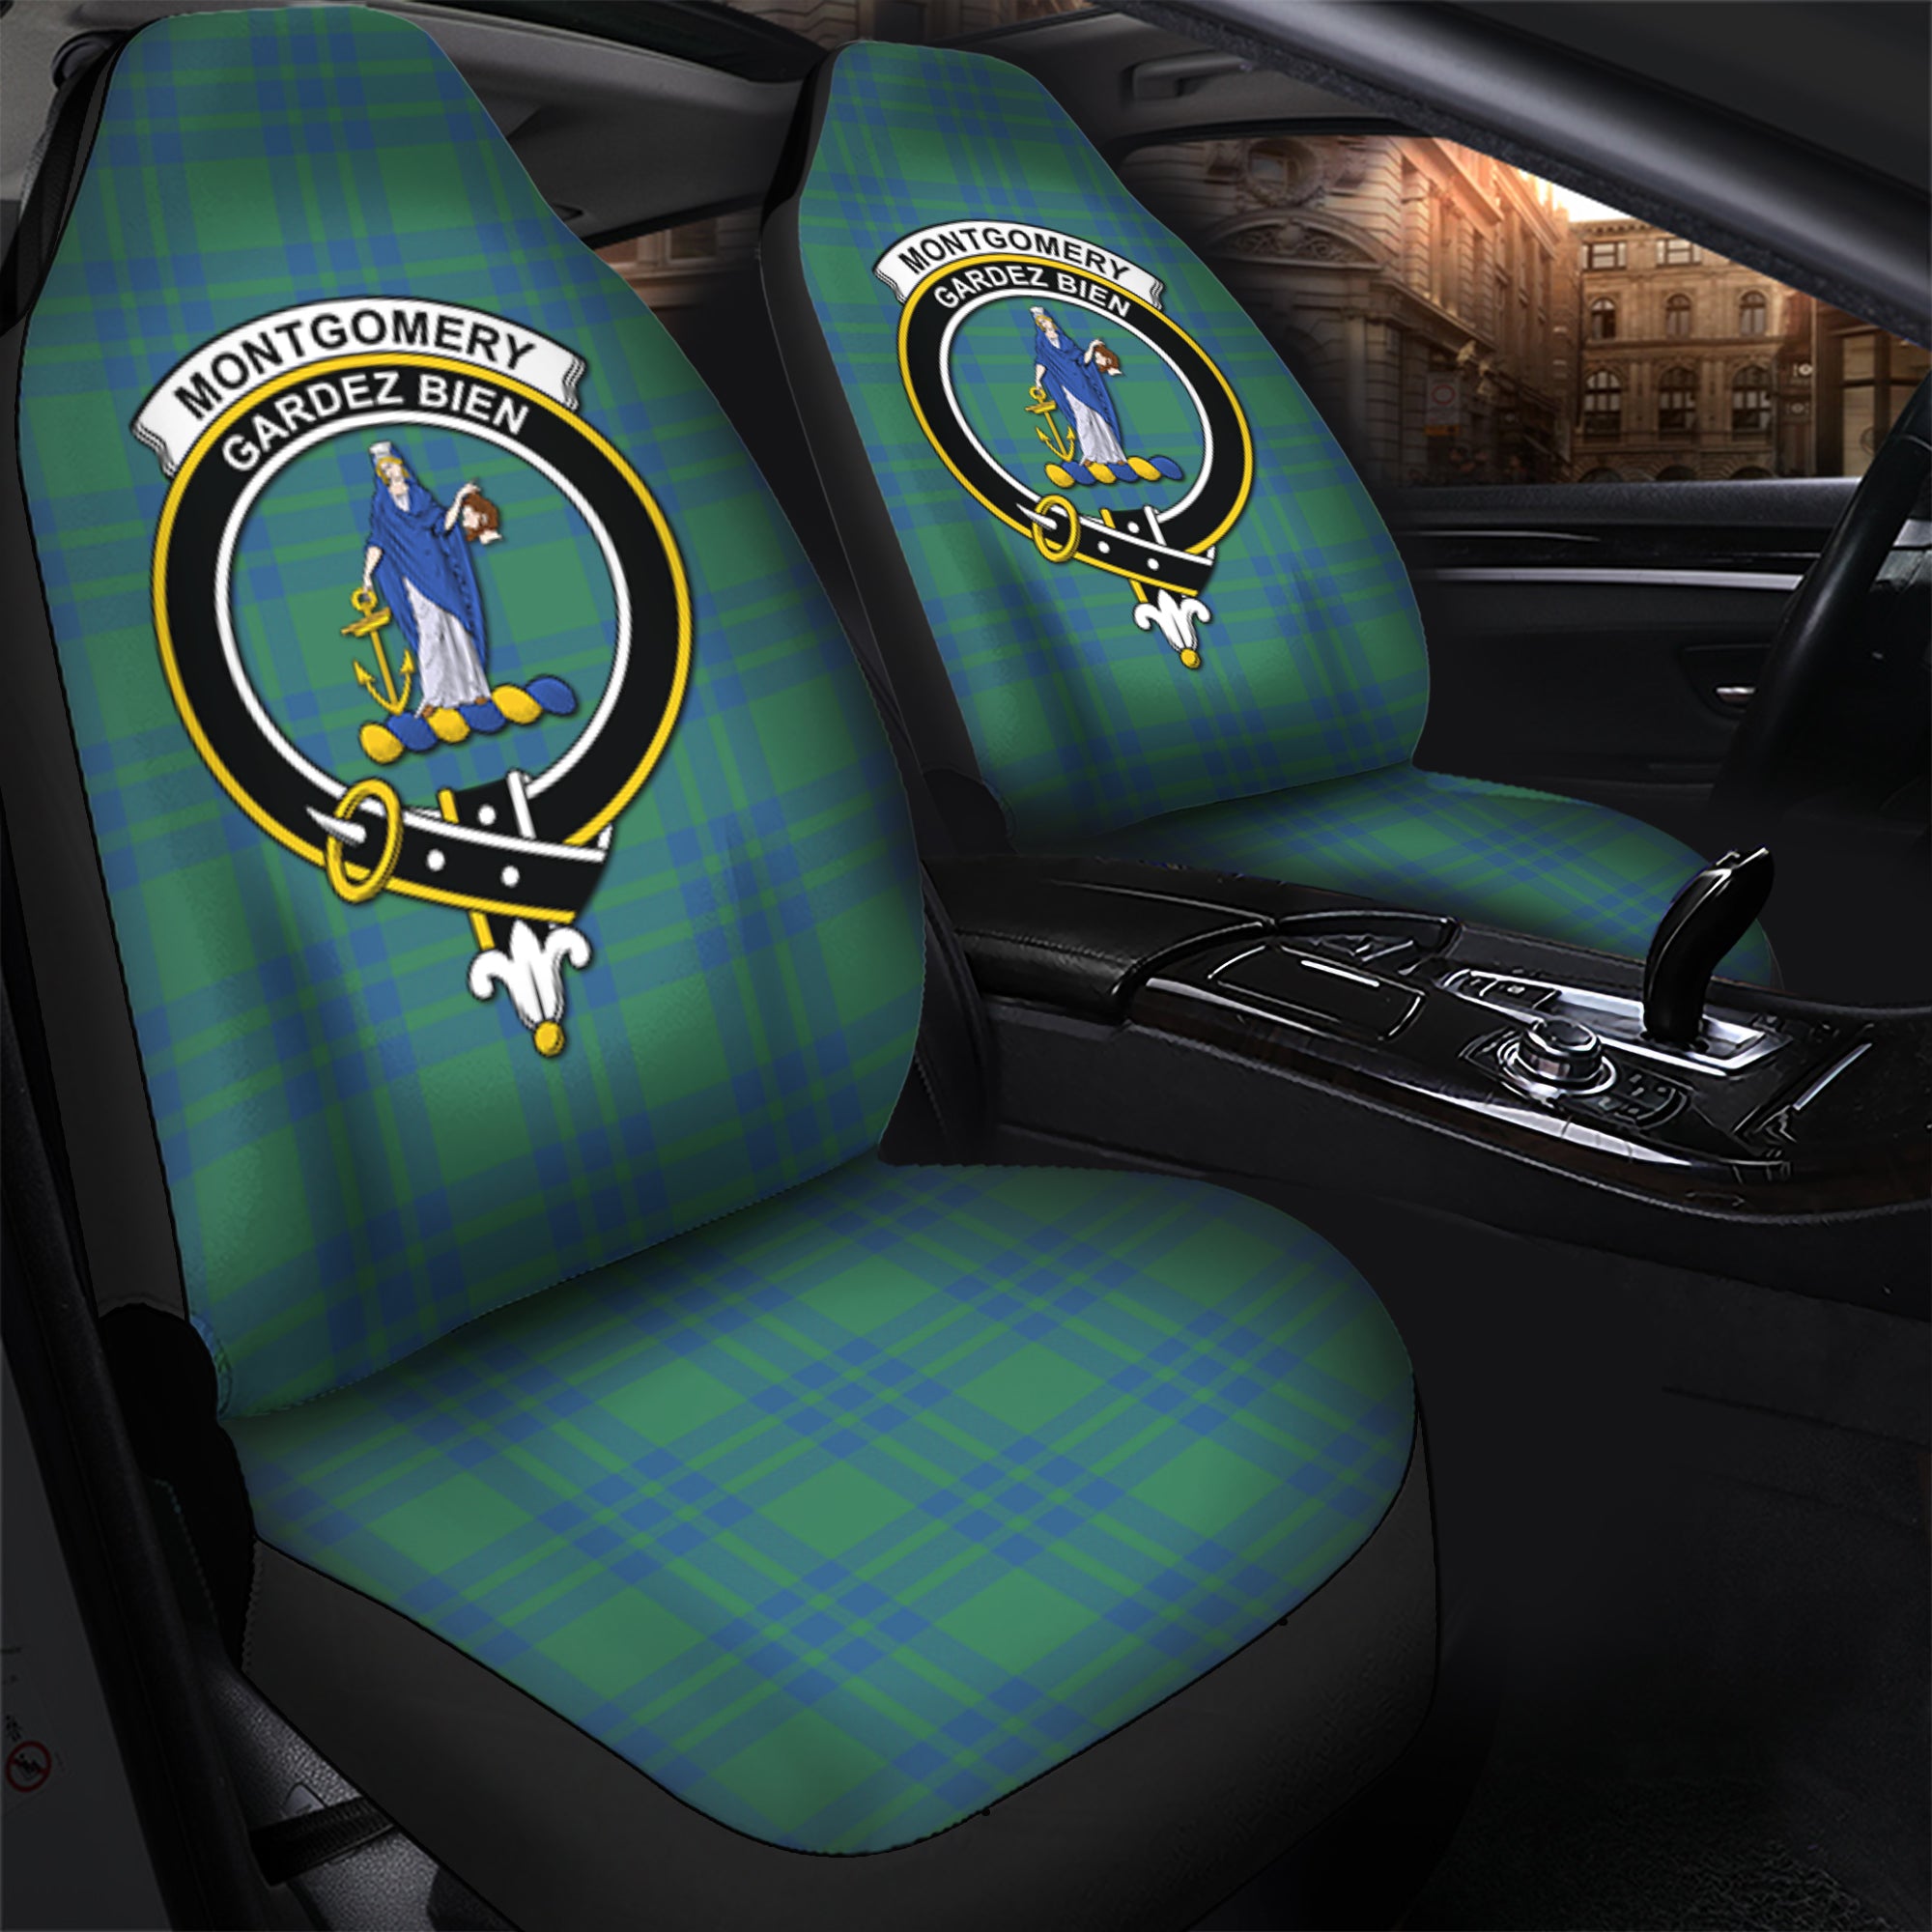 Montgomery Ancient Clan Tartan Car Seat Cover, Family Crest Tartan Seat Cover TS23